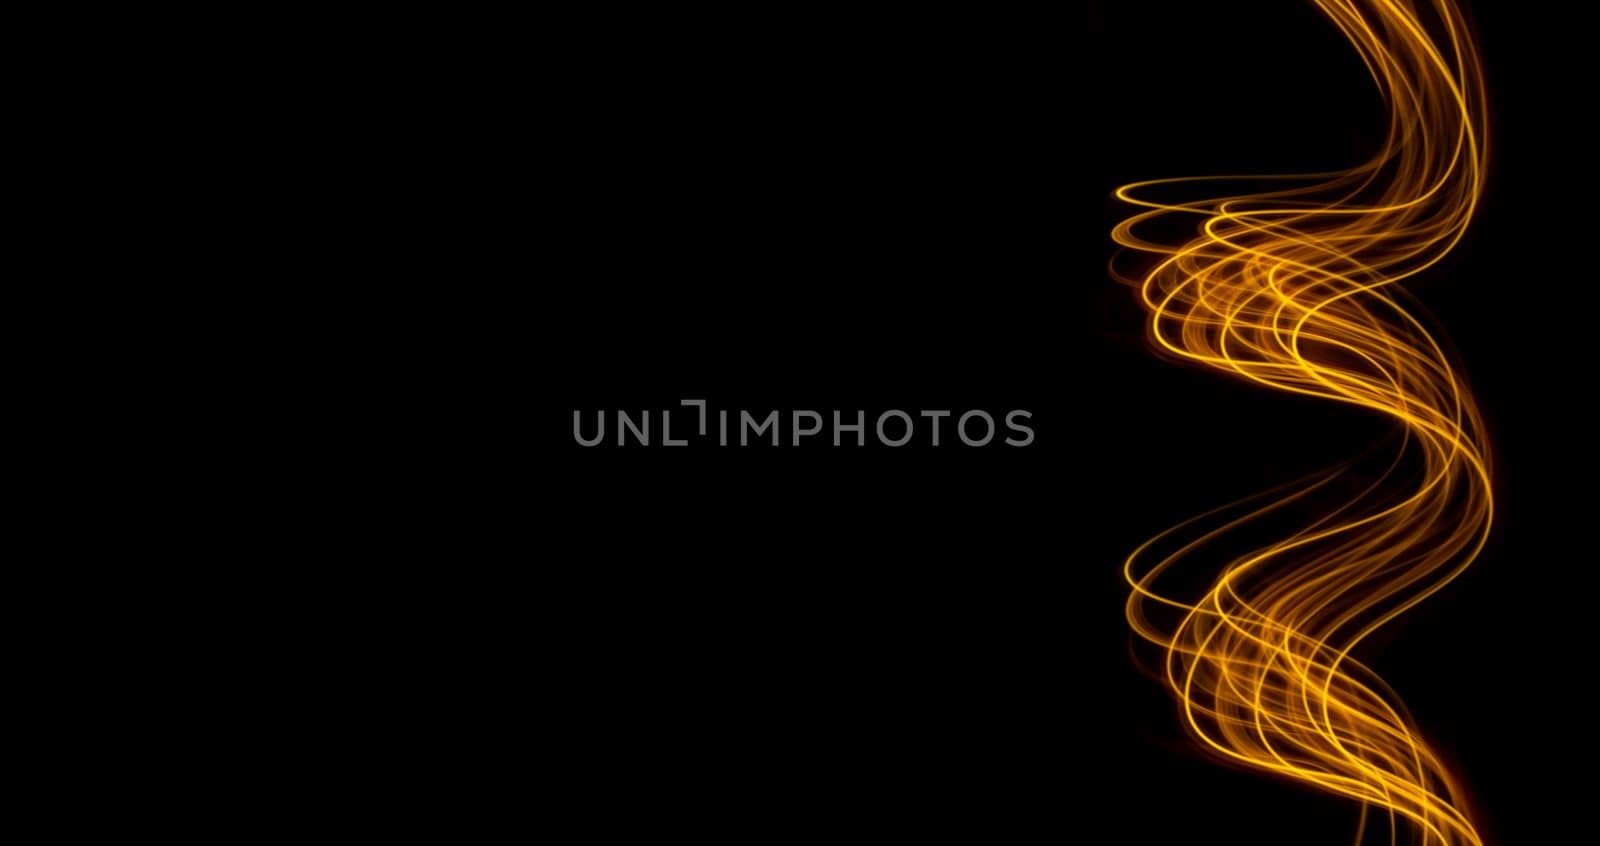 Futuristic light wave of energy with elegant glowing lines banner design. Abstract modern technology background. Velocity concept. by PaulCarr